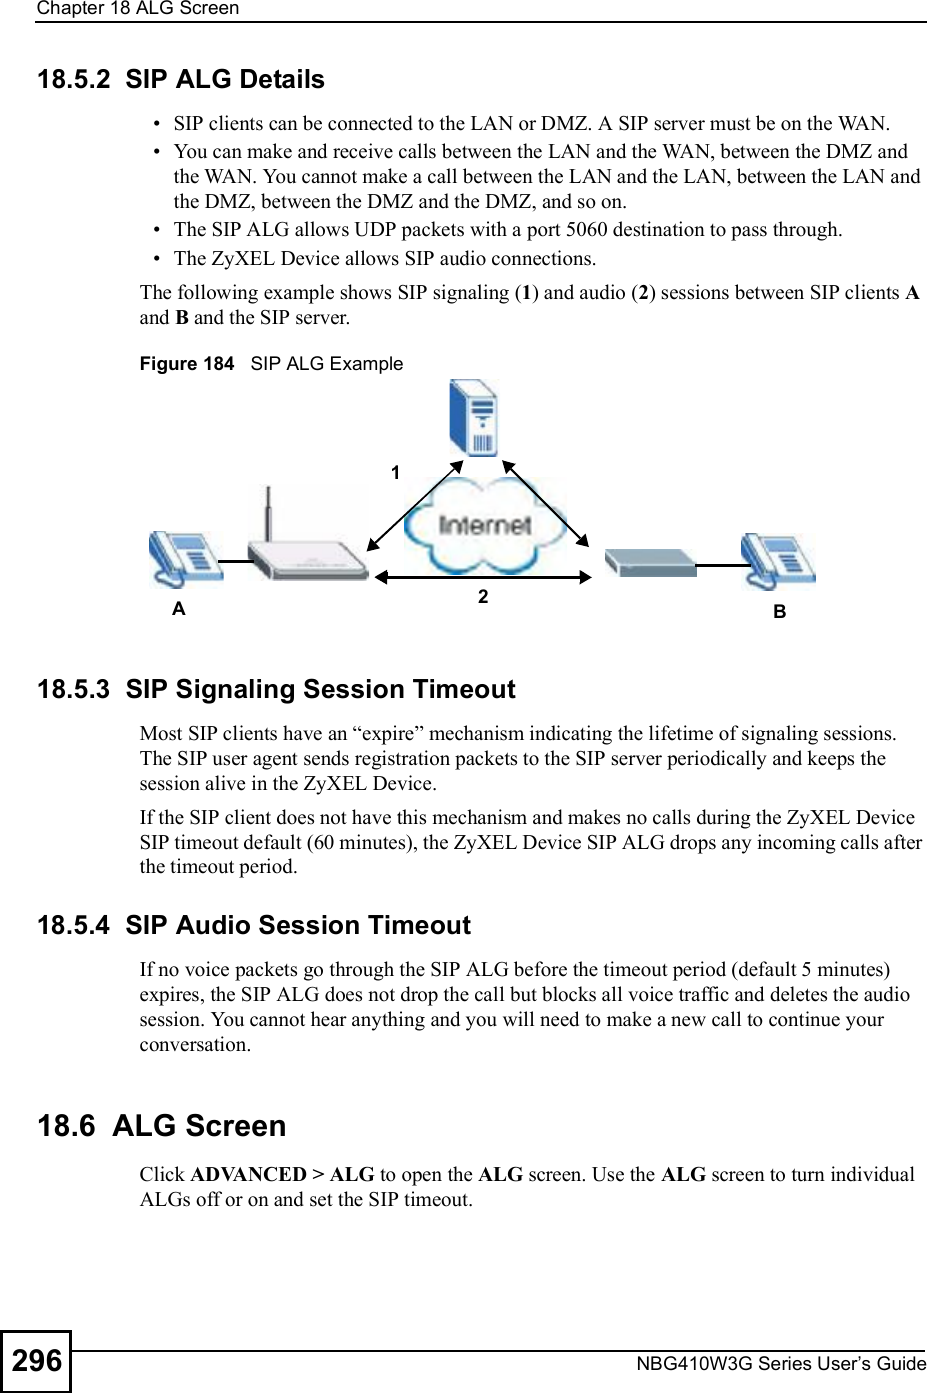 Chapter 18ALG ScreenNBG410W3G Series User s Guide29618.5.2  SIP ALG Details SIP clients can be connected to the LAN or DMZ. A SIP server must be on the WAN.  You can make and receive calls between the LAN and the WAN, between the DMZ and the WAN. You cannot make a call between the LAN and the LAN, between the LAN and the DMZ, between the DMZ and the DMZ, and so on. The SIP ALG allows UDP packets with a port 5060 destination to pass through. The ZyXEL Device allows SIP audio connections. The following example shows SIP signaling (1) and audio (2) sessions between SIP clients A and B and the SIP server. Figure 184   SIP ALG Example 18.5.3  SIP Signaling Session TimeoutMost SIP clients have an &quot;expire# mechanism indicating the lifetime of signaling sessions. The SIP user agent sends registration packets to the SIP server periodically and keeps the session alive in the ZyXEL Device. If the SIP client does not have this mechanism and makes no calls during the ZyXEL Device SIP timeout default (60 minutes), the ZyXEL Device SIP ALG drops any incoming calls after the timeout period. 18.5.4  SIP Audio Session TimeoutIf no voice packets go through the SIP ALG before the timeout period (default 5 minutes) expires, the SIP ALG does not drop the call but blocks all voice traffic and deletes the audio session. You cannot hear anything and you will need to make a new call to continue your conversation.18.6  ALG Screen Click ADVANCED &gt; ALG to open the ALG screen. Use the ALG screen to turn individual ALGs off or on and set the SIP timeout. A12B